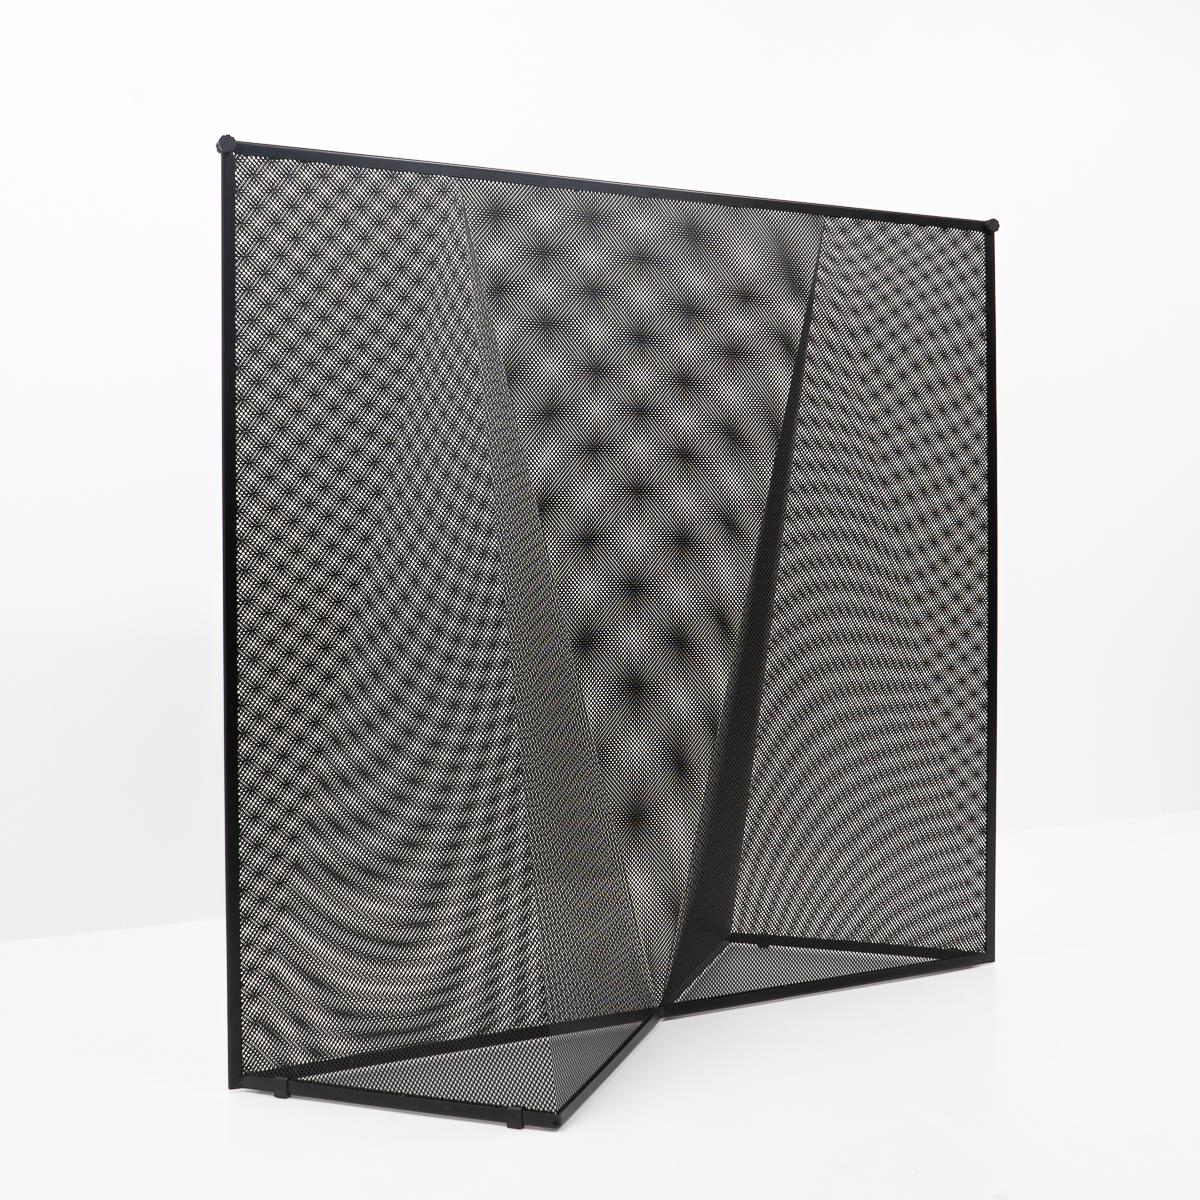 Nilla Rosa room divider by Mario Botta for Alias, Italy. No longer in production. 

The room divider or paravent consists of two sheets of perforated metal bent into geometrical shapes. The structure gives a very interesting effect, as the play of